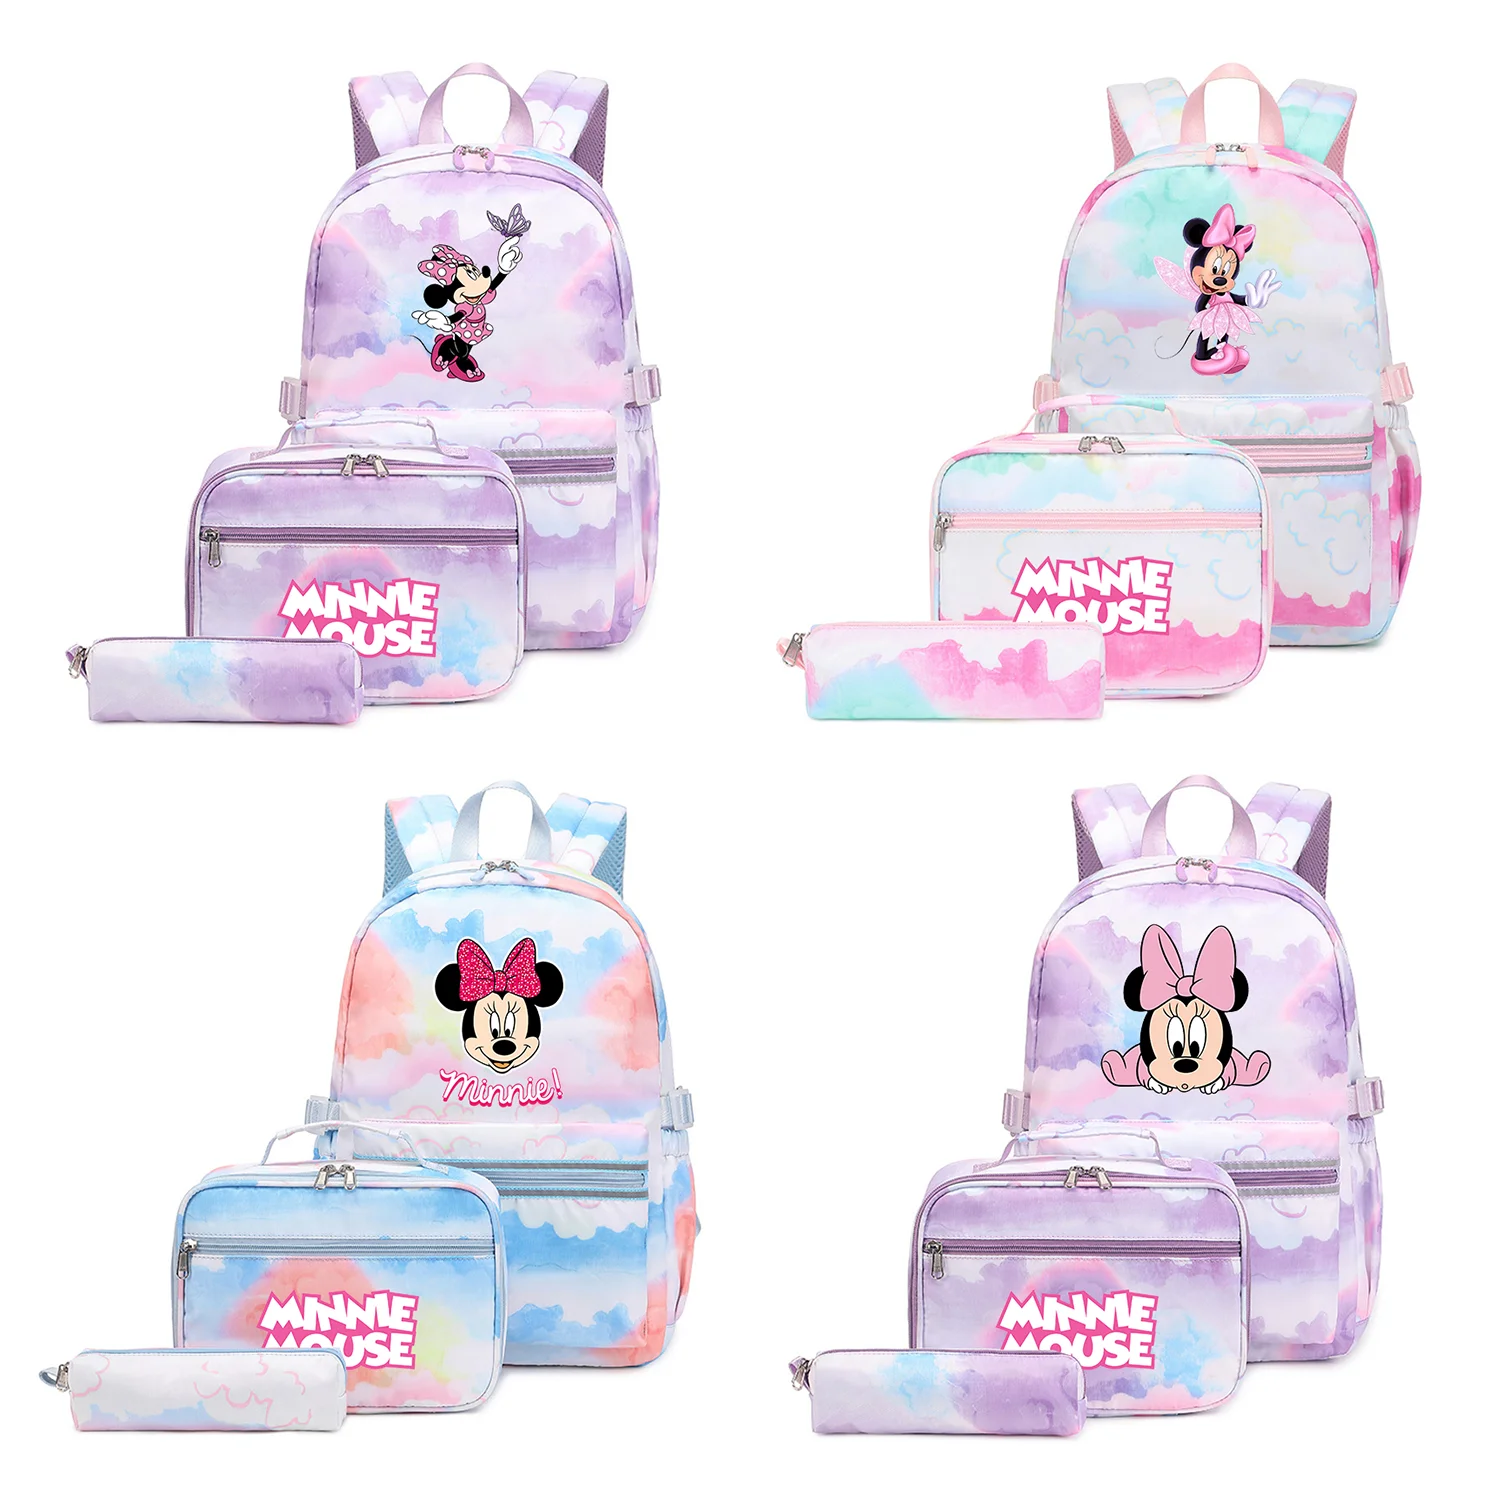 

3Pcs/Set Disney Mickey Minnie Mouse Boys Girls School bags Teenager Backpack Colorful Bag Student with Lunch Bag Travel Mochilas